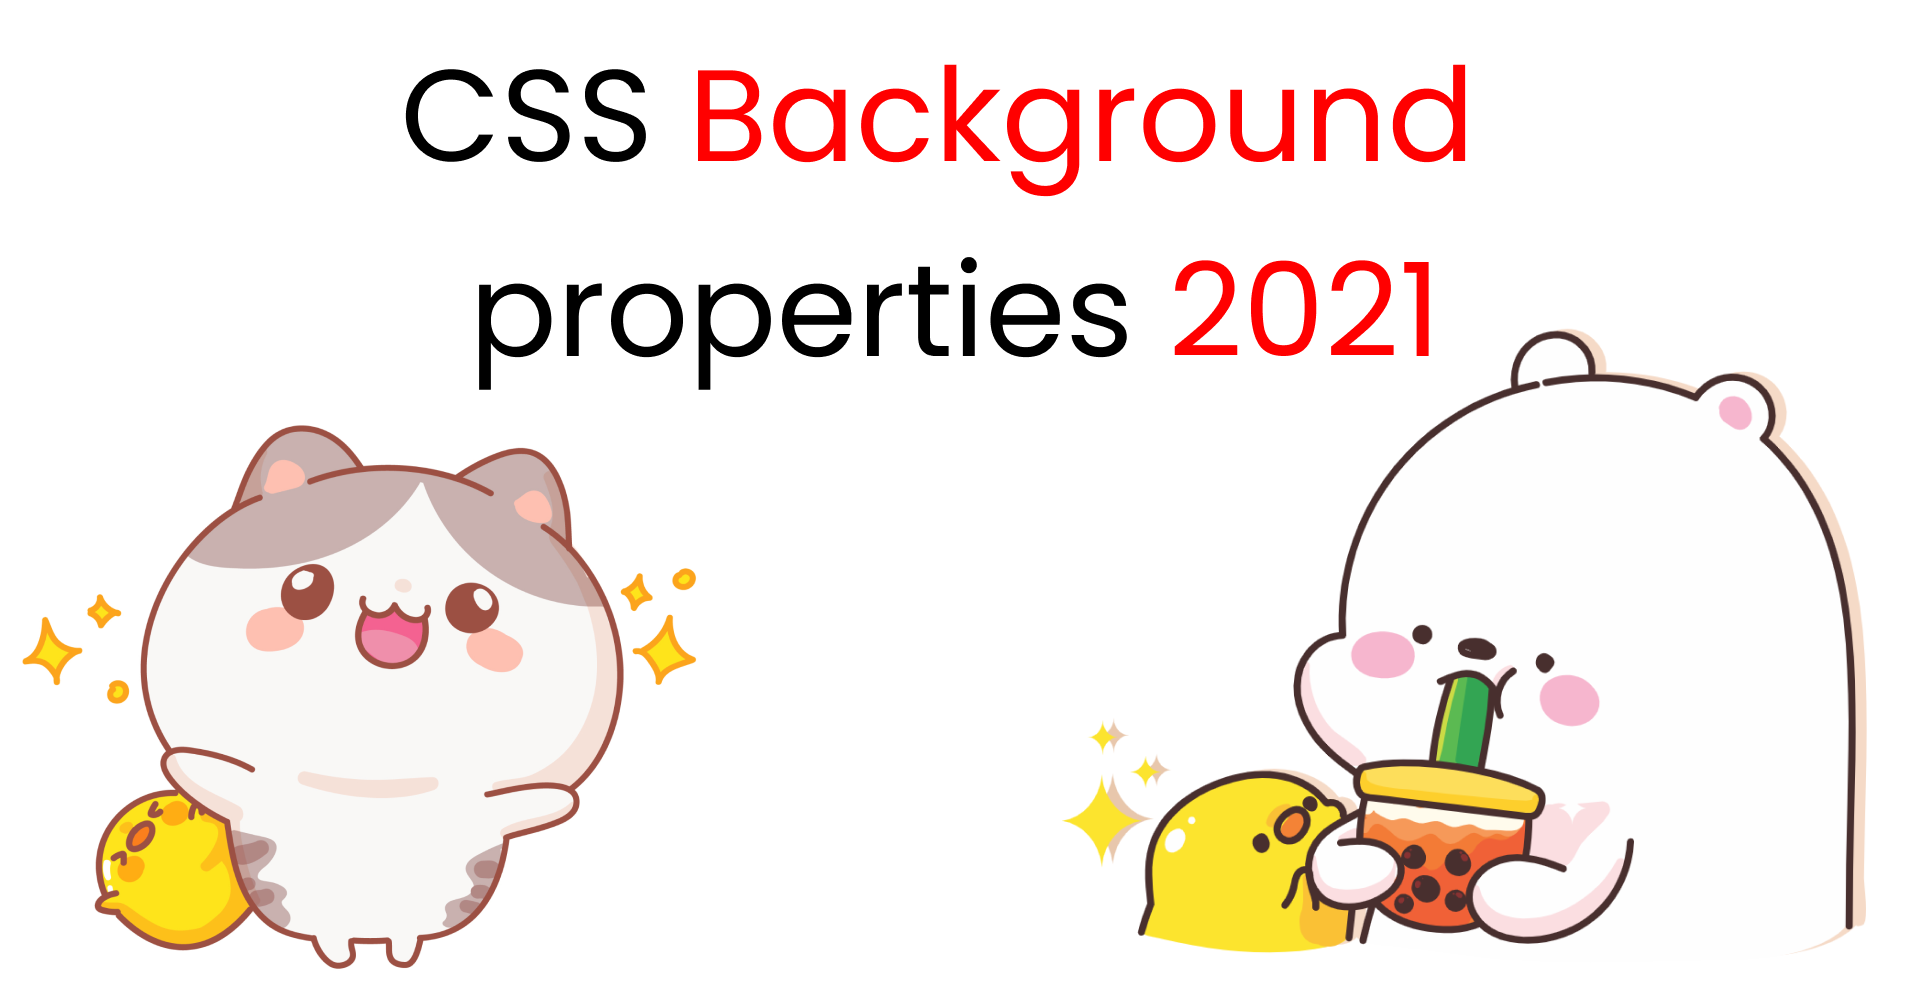 Every CSS Background Property Illustrated and Explained with Code Examples 🎖️